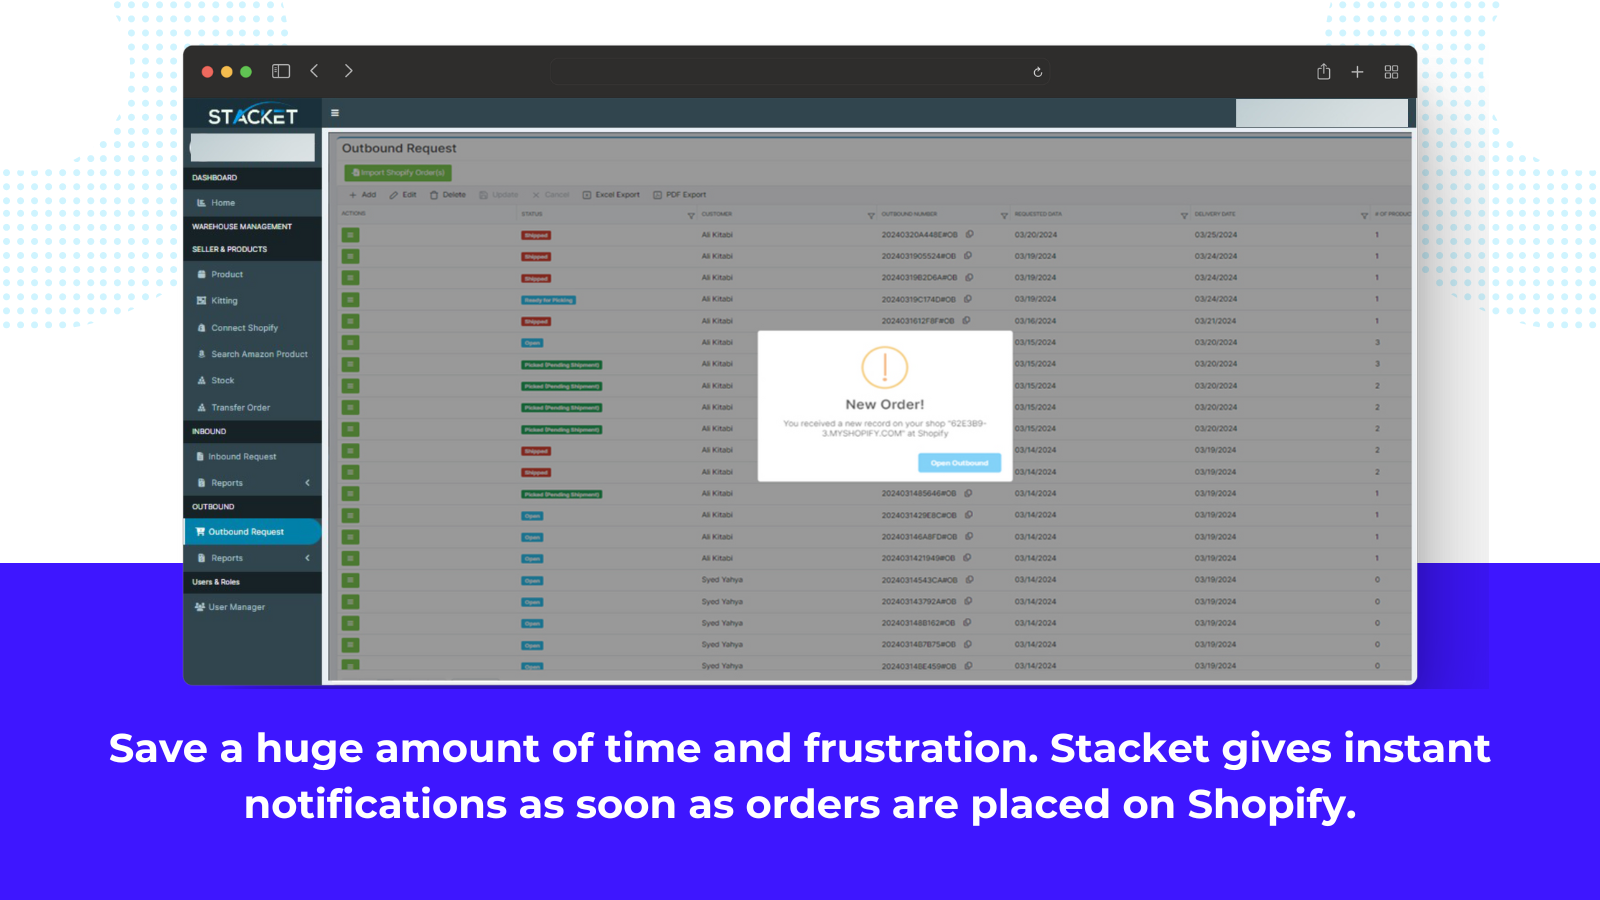 Save time and frustration. Stacket gives instanst notifications.